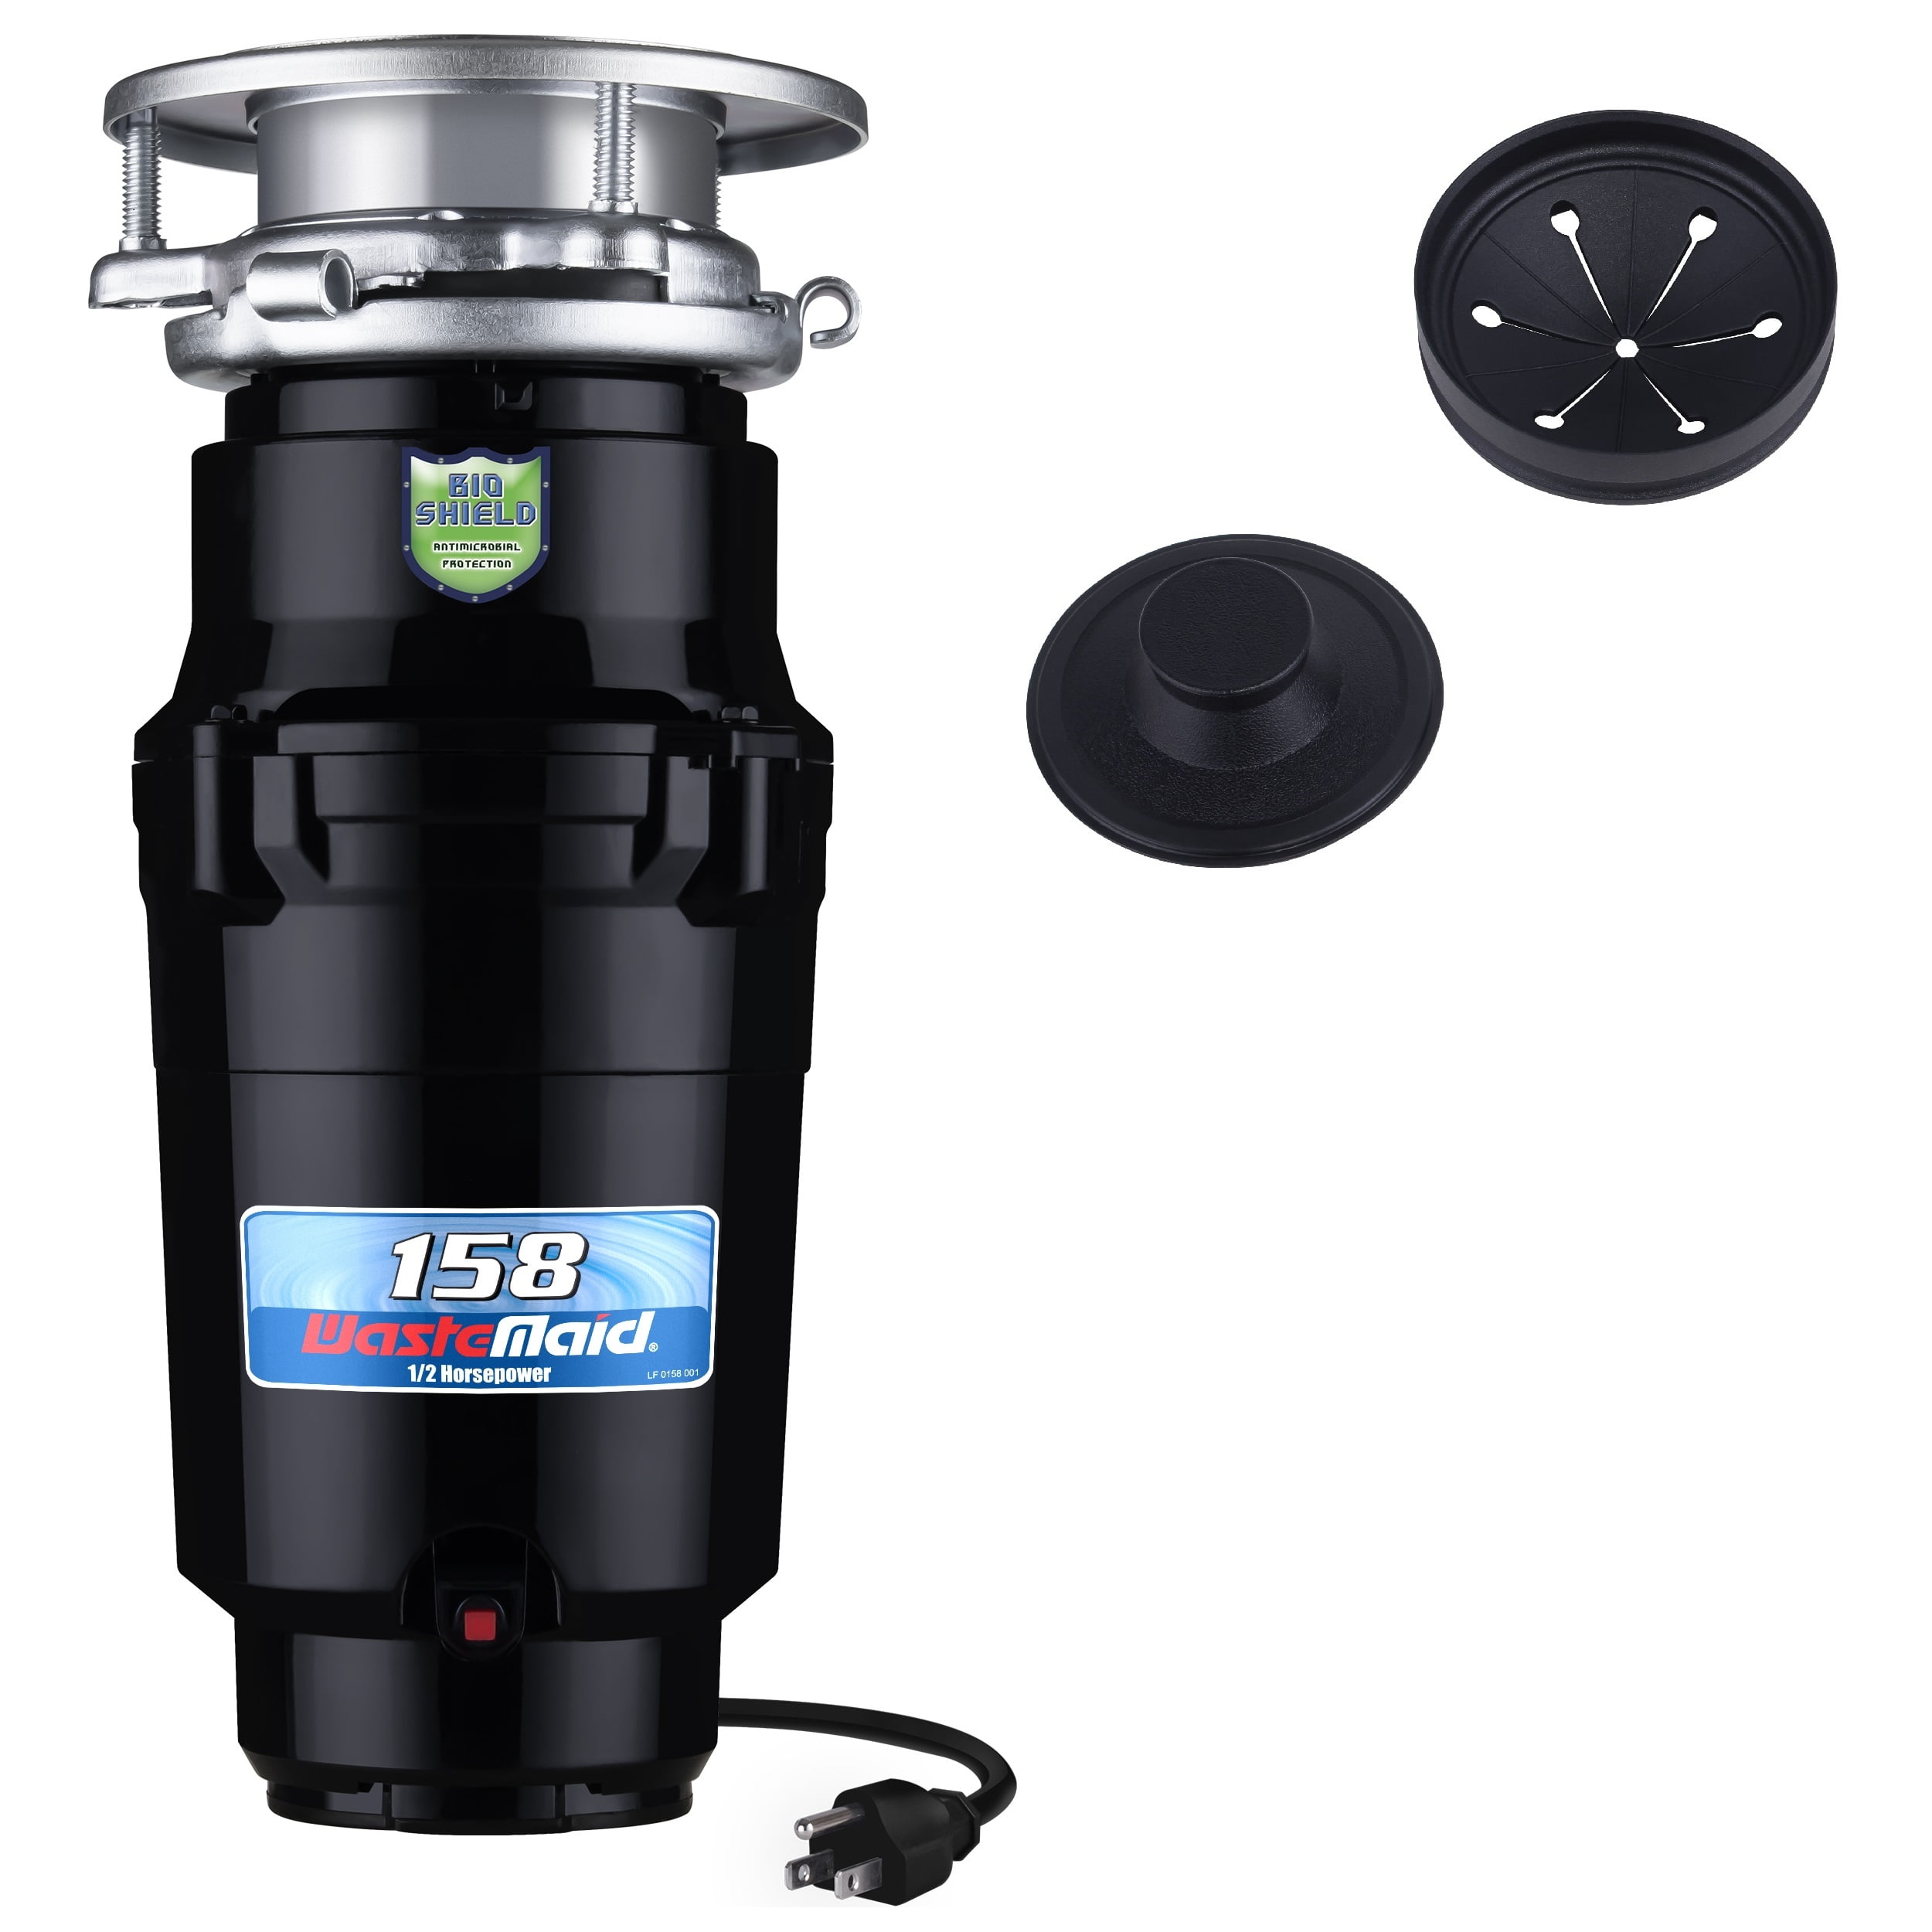 Waste Maid Economy 1/2 HP Continuous Feed Garbage Disposal 10-US-WM-058-3B 